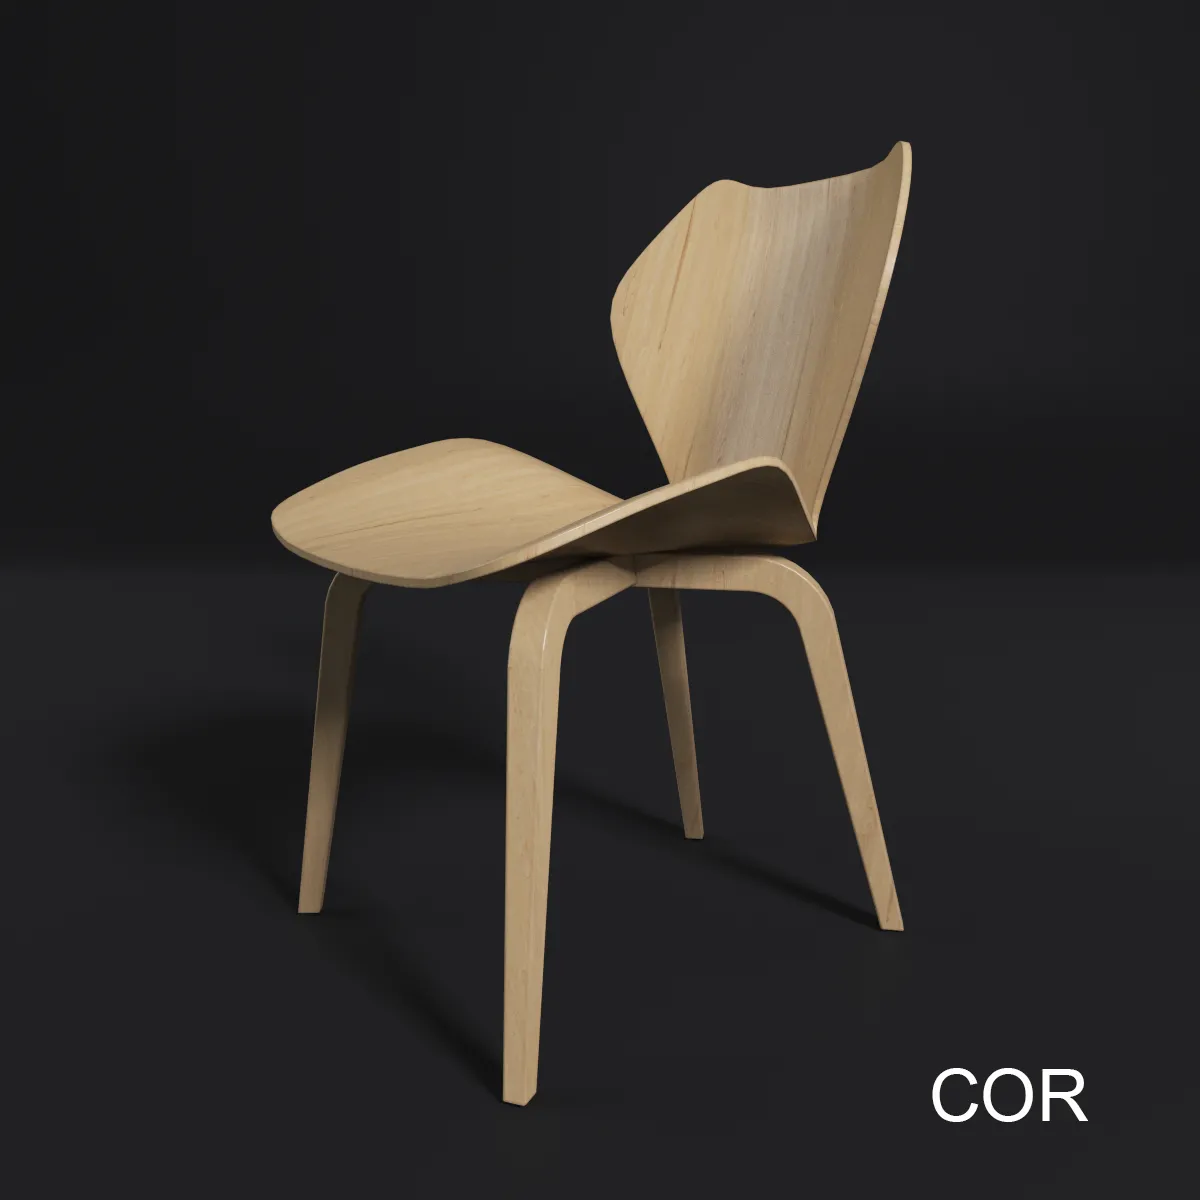 Chair and Armchair 3D Models – COR chair